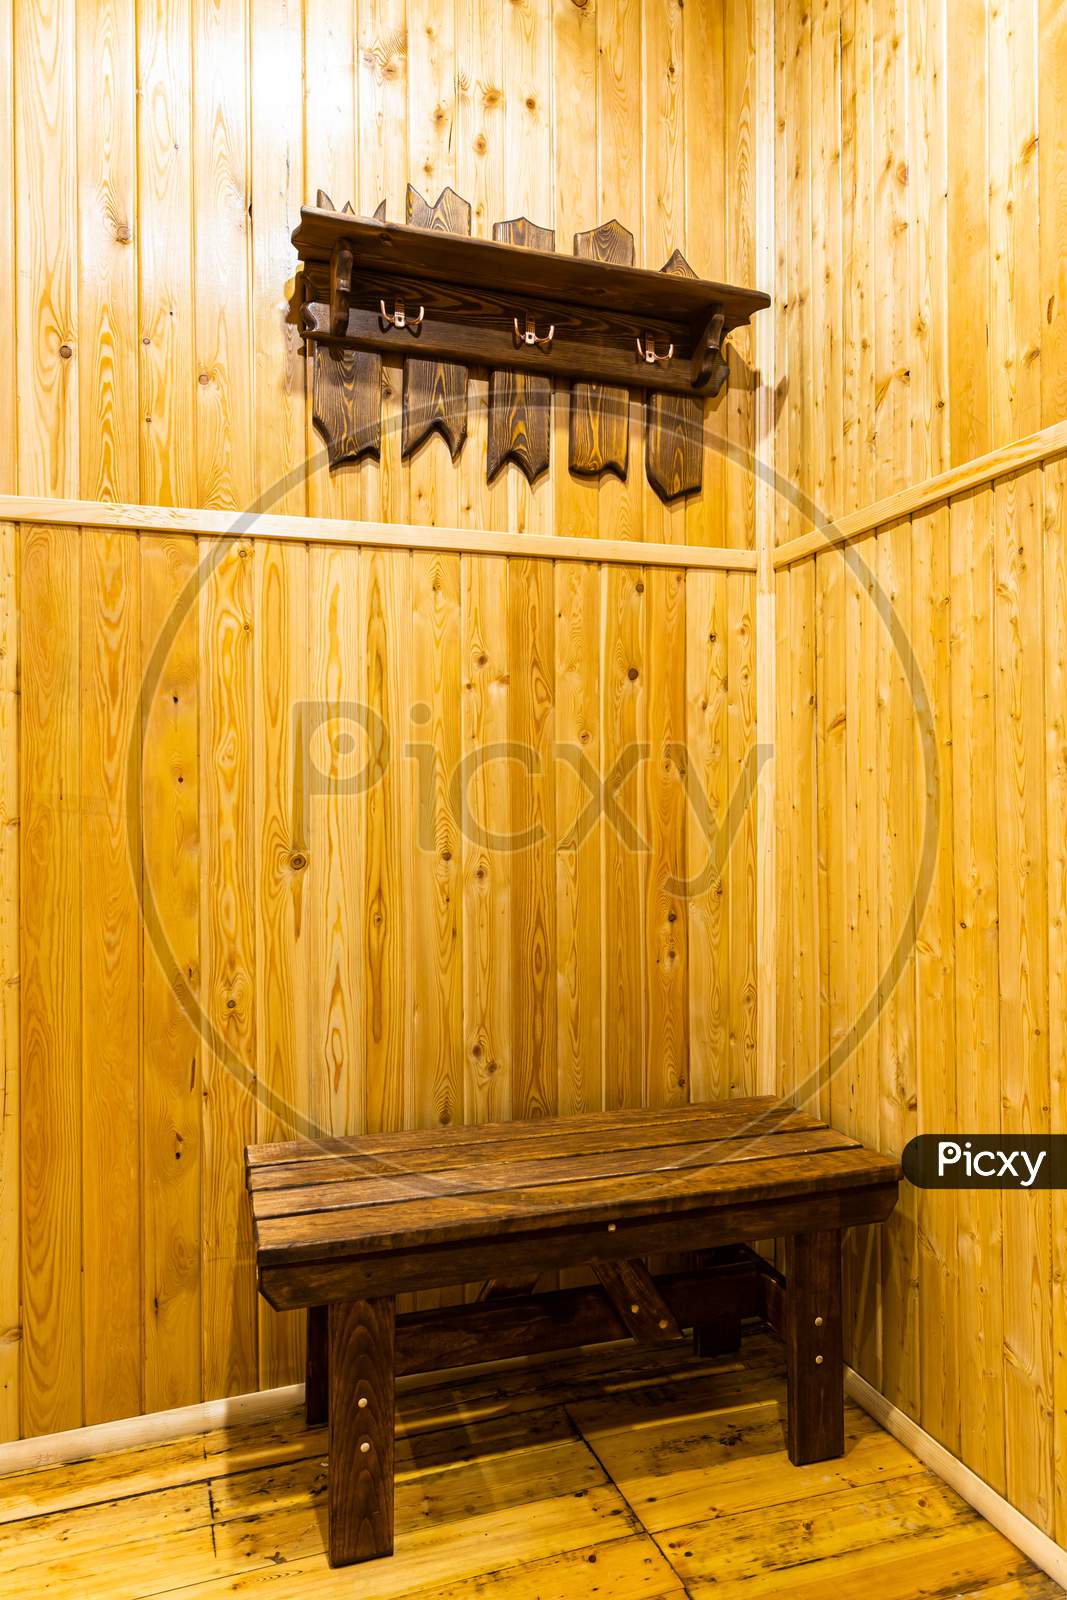 Close-Up Of Wooden Hangers For Upper Clothes, Made By Hand From Wood In The Hallway Of The House. View Of The Corridor In A Country House In Wooden Walls And Floor